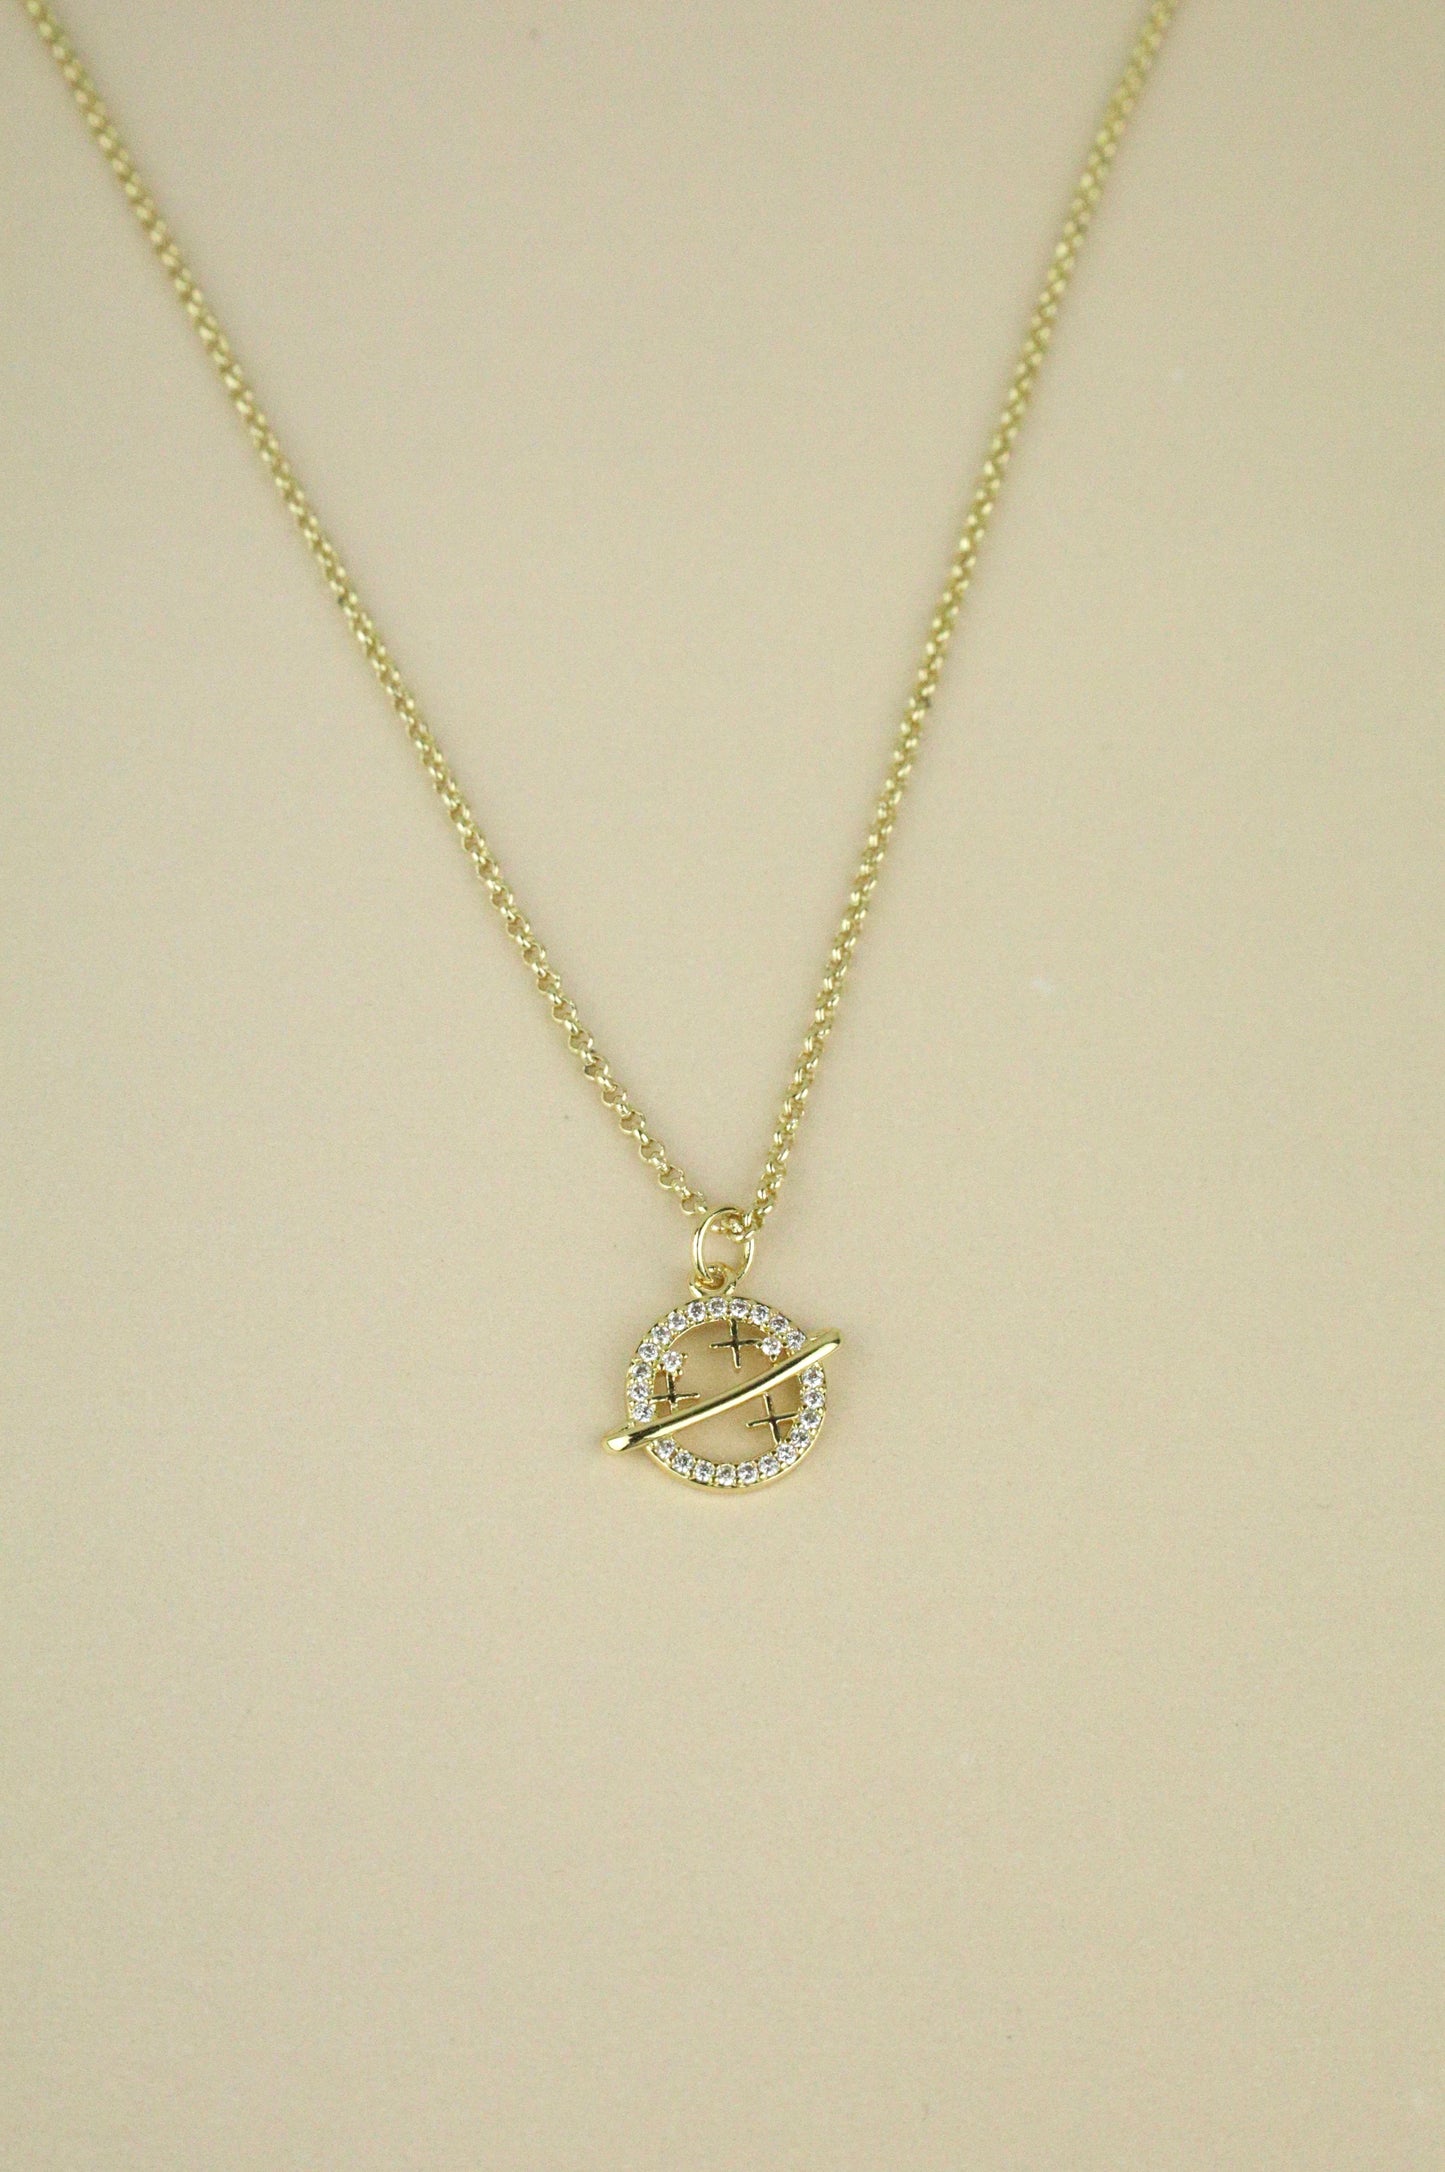 Celestial Saturn “Will Power” necklace